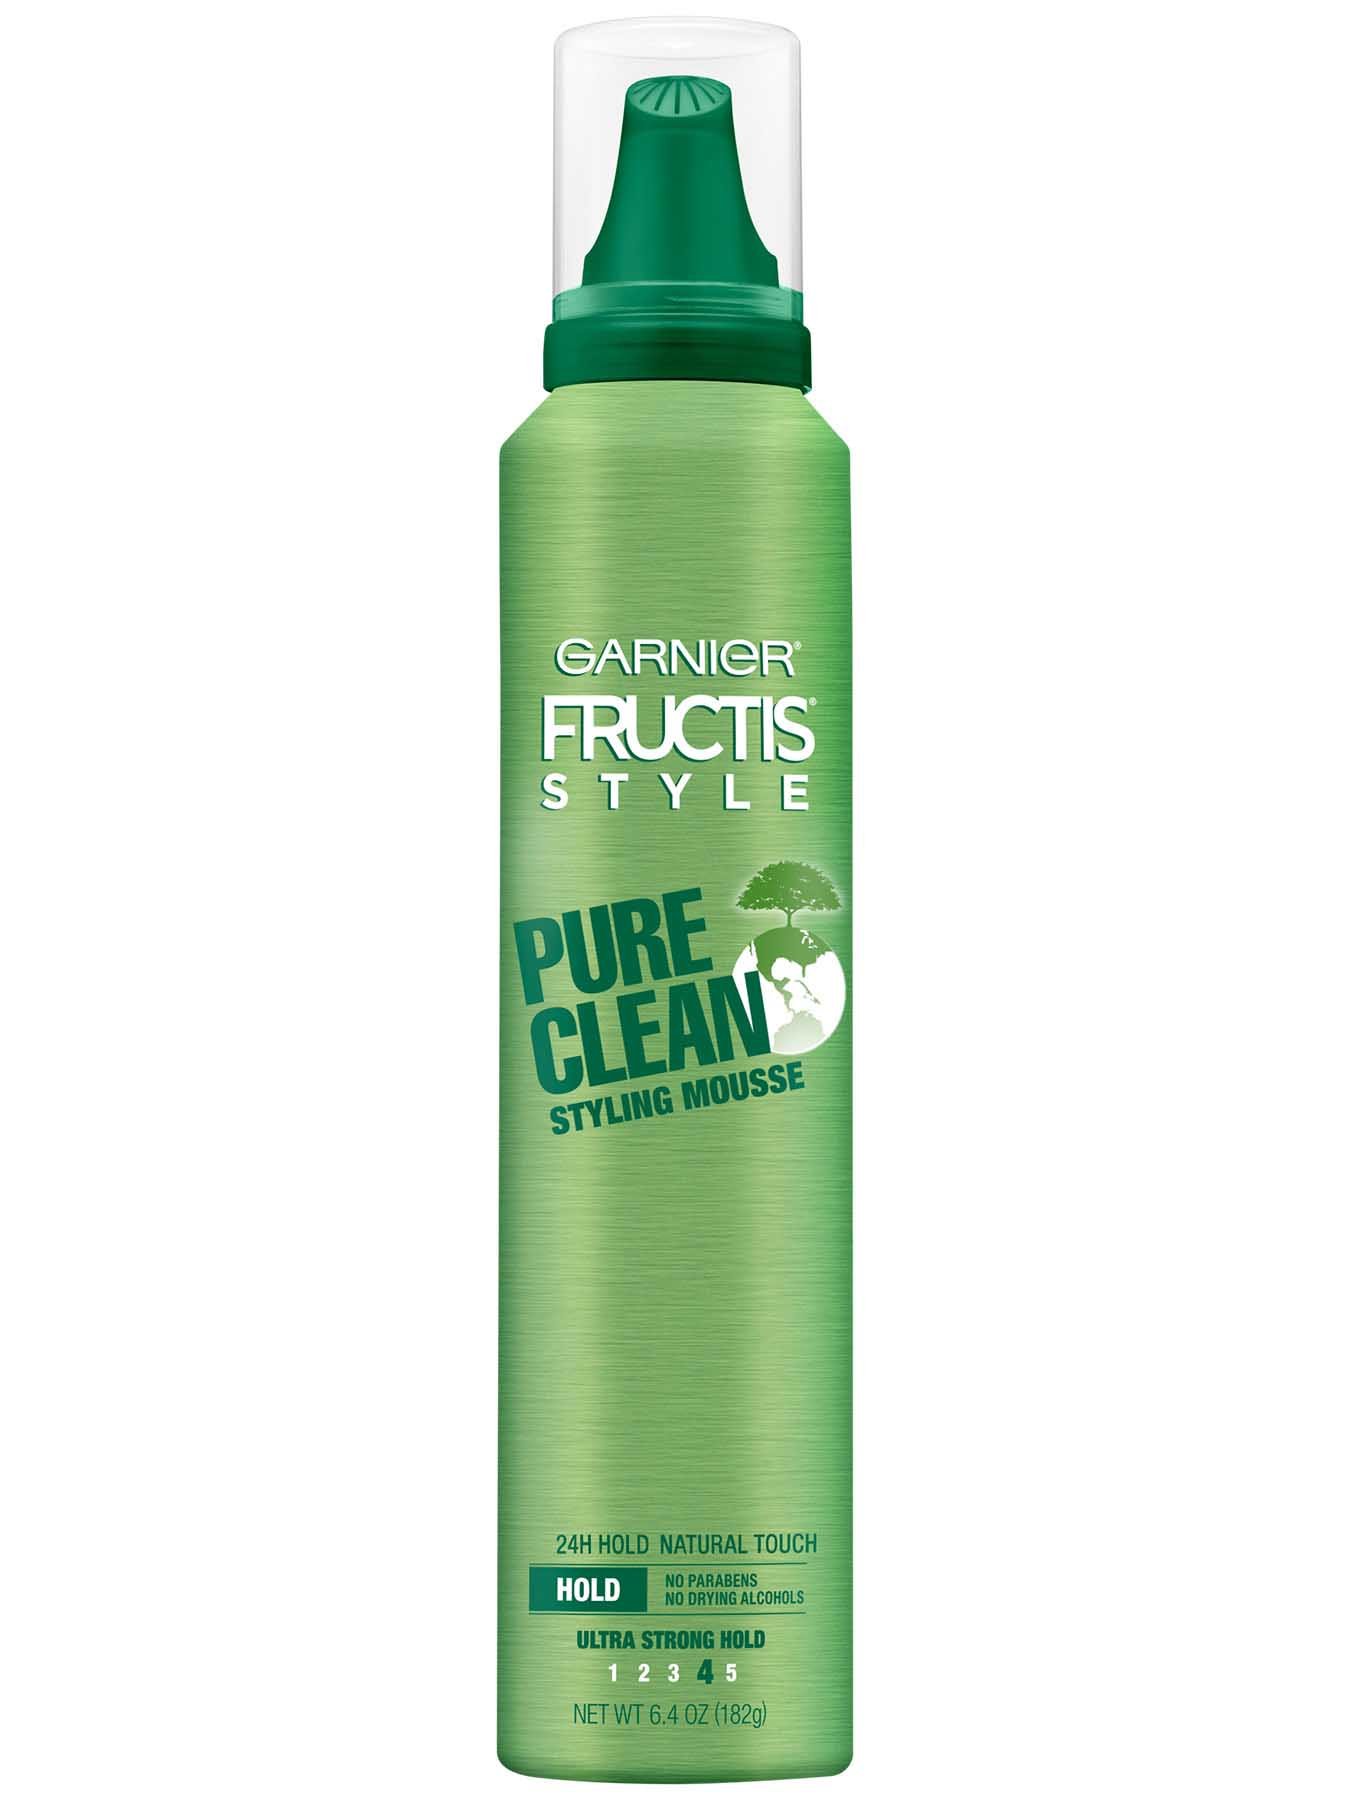 Garnier Fructis Style Pure Clean Styling Mousse - Hair Style product